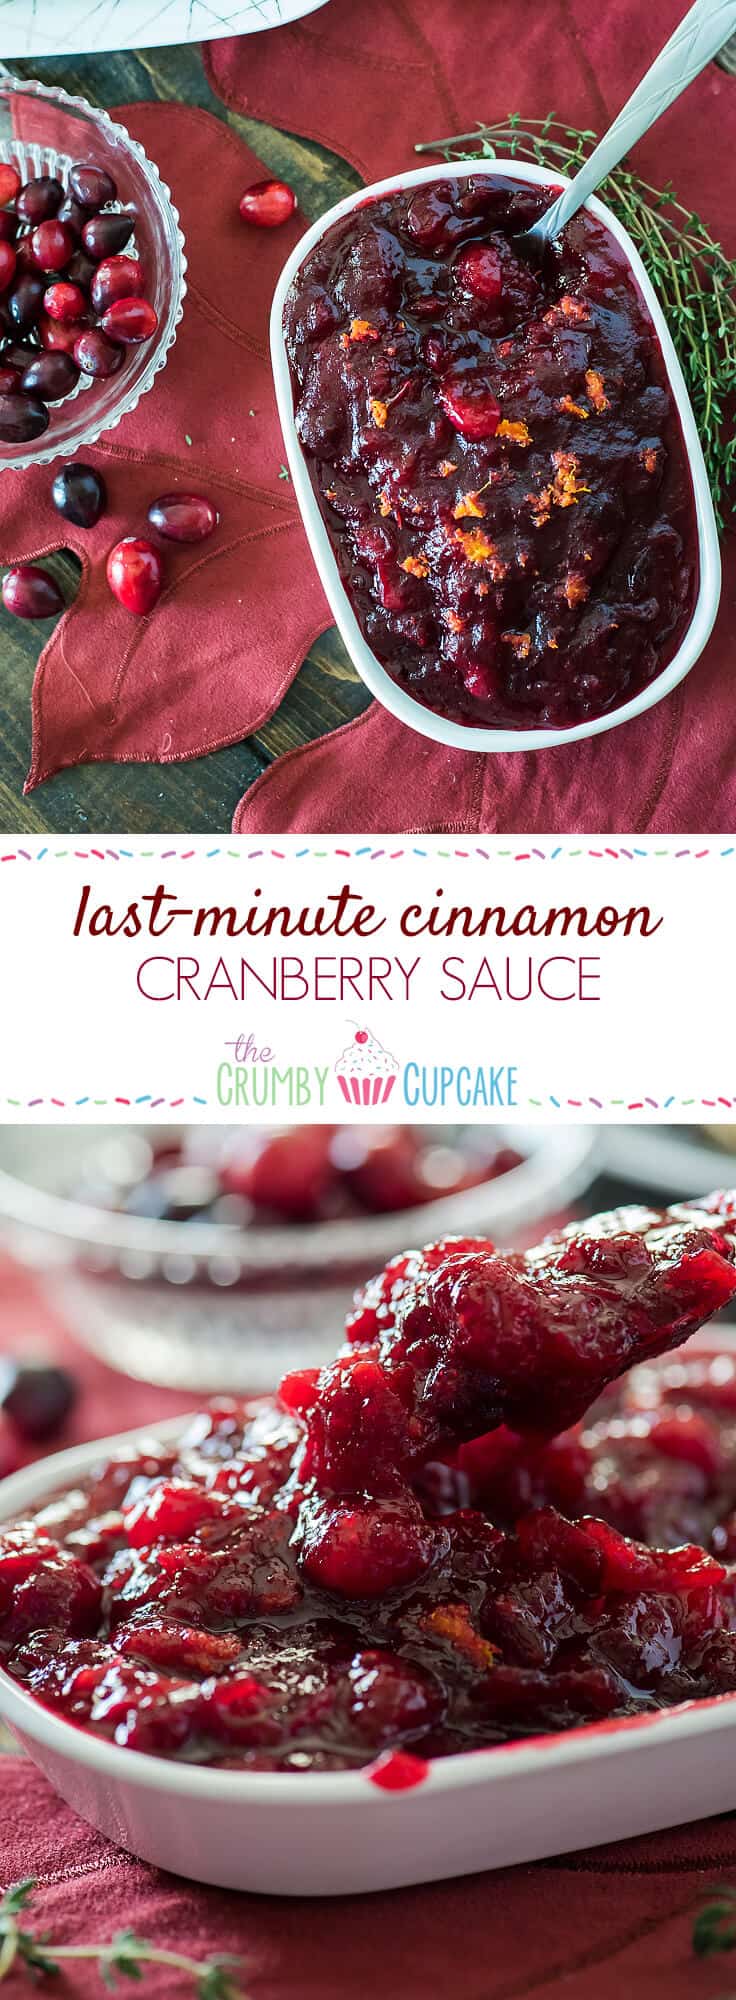 Never open a can of jellied cranberries again! This quick Last-Minute Cinnamon Cranberry Sauce is so simple, you'll be volunteering to bring the sides to every holiday dinner! 